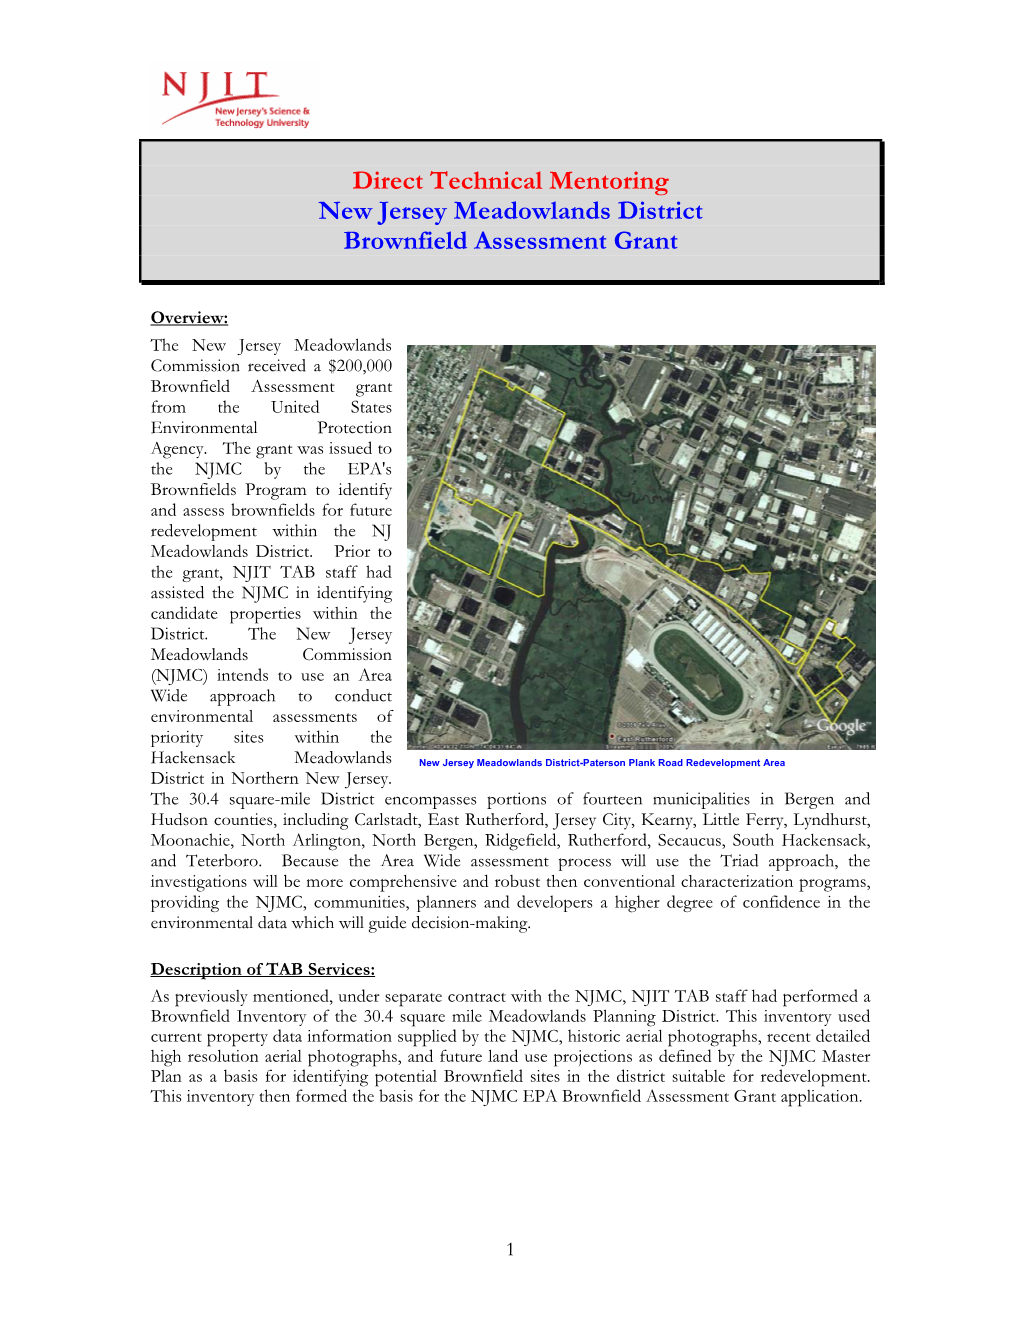 New Jersey Meadowlands District Brownfield Assessment Grant